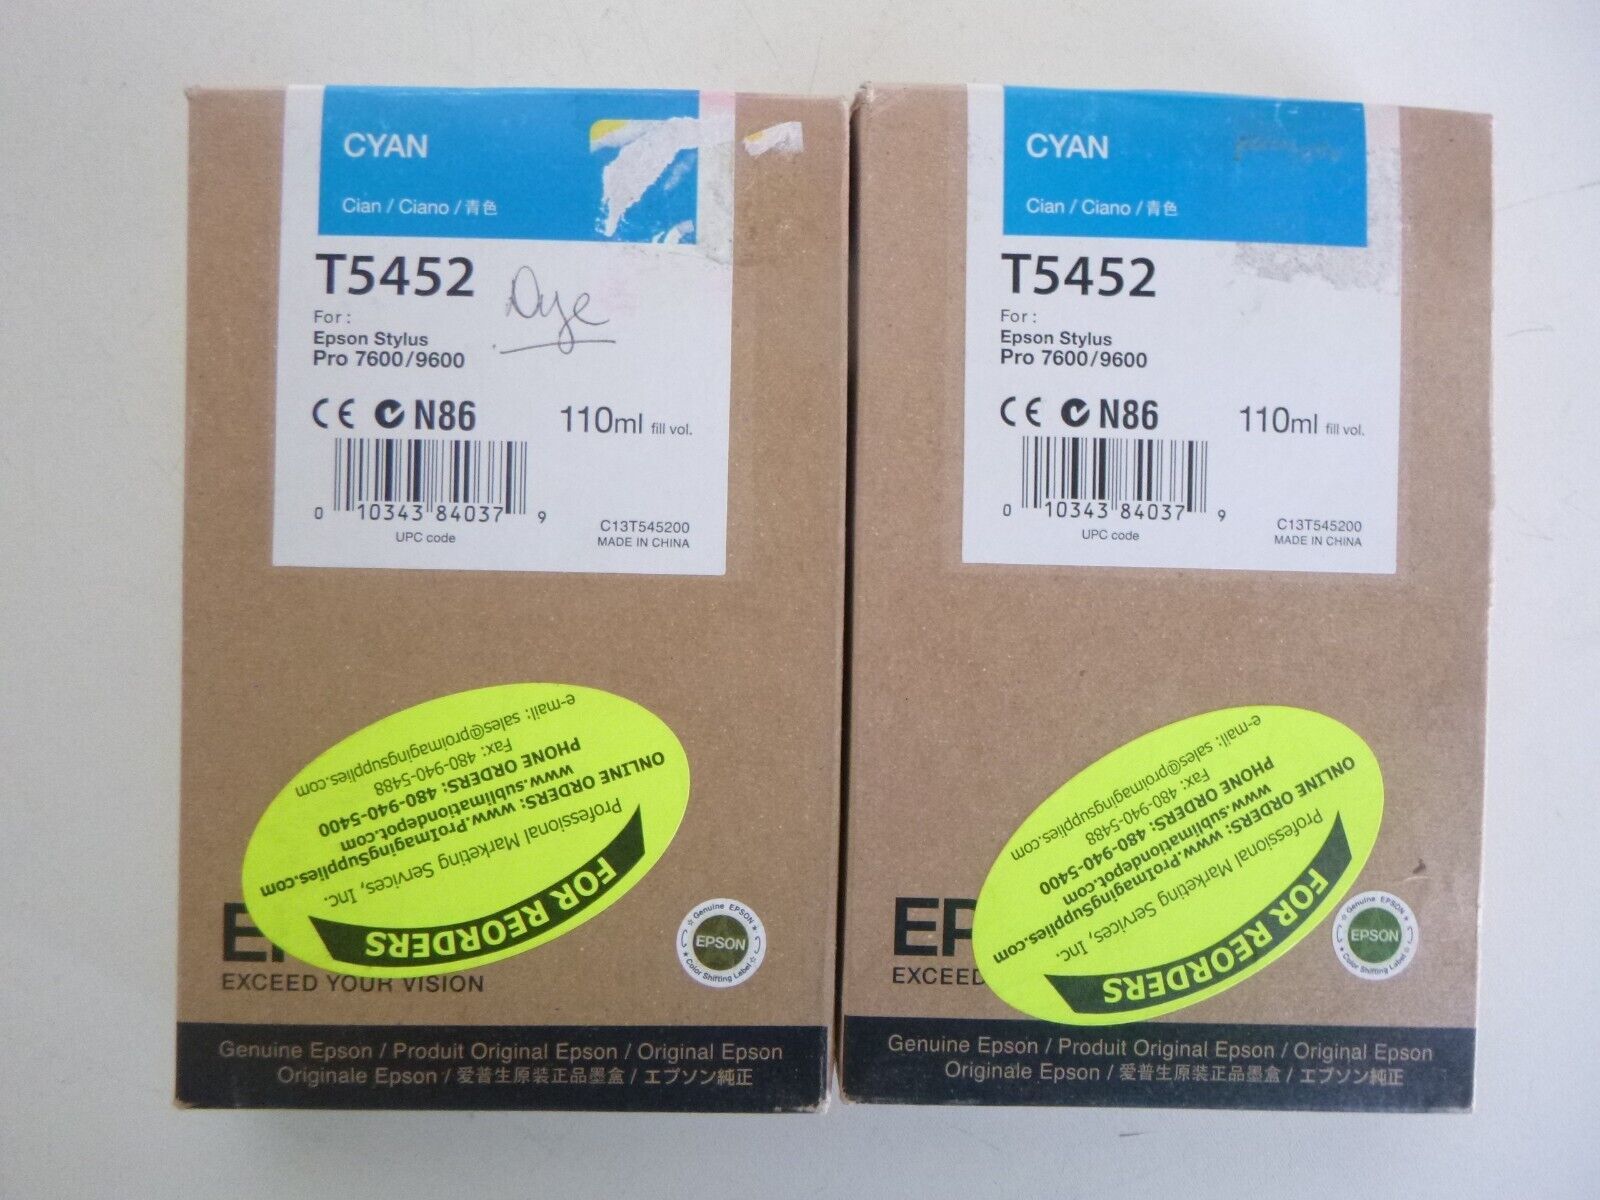 New Genuine Epson T5452 110ml Cyan Ink C13T545200 Lot of 2 Exp. 2015 - $28.08